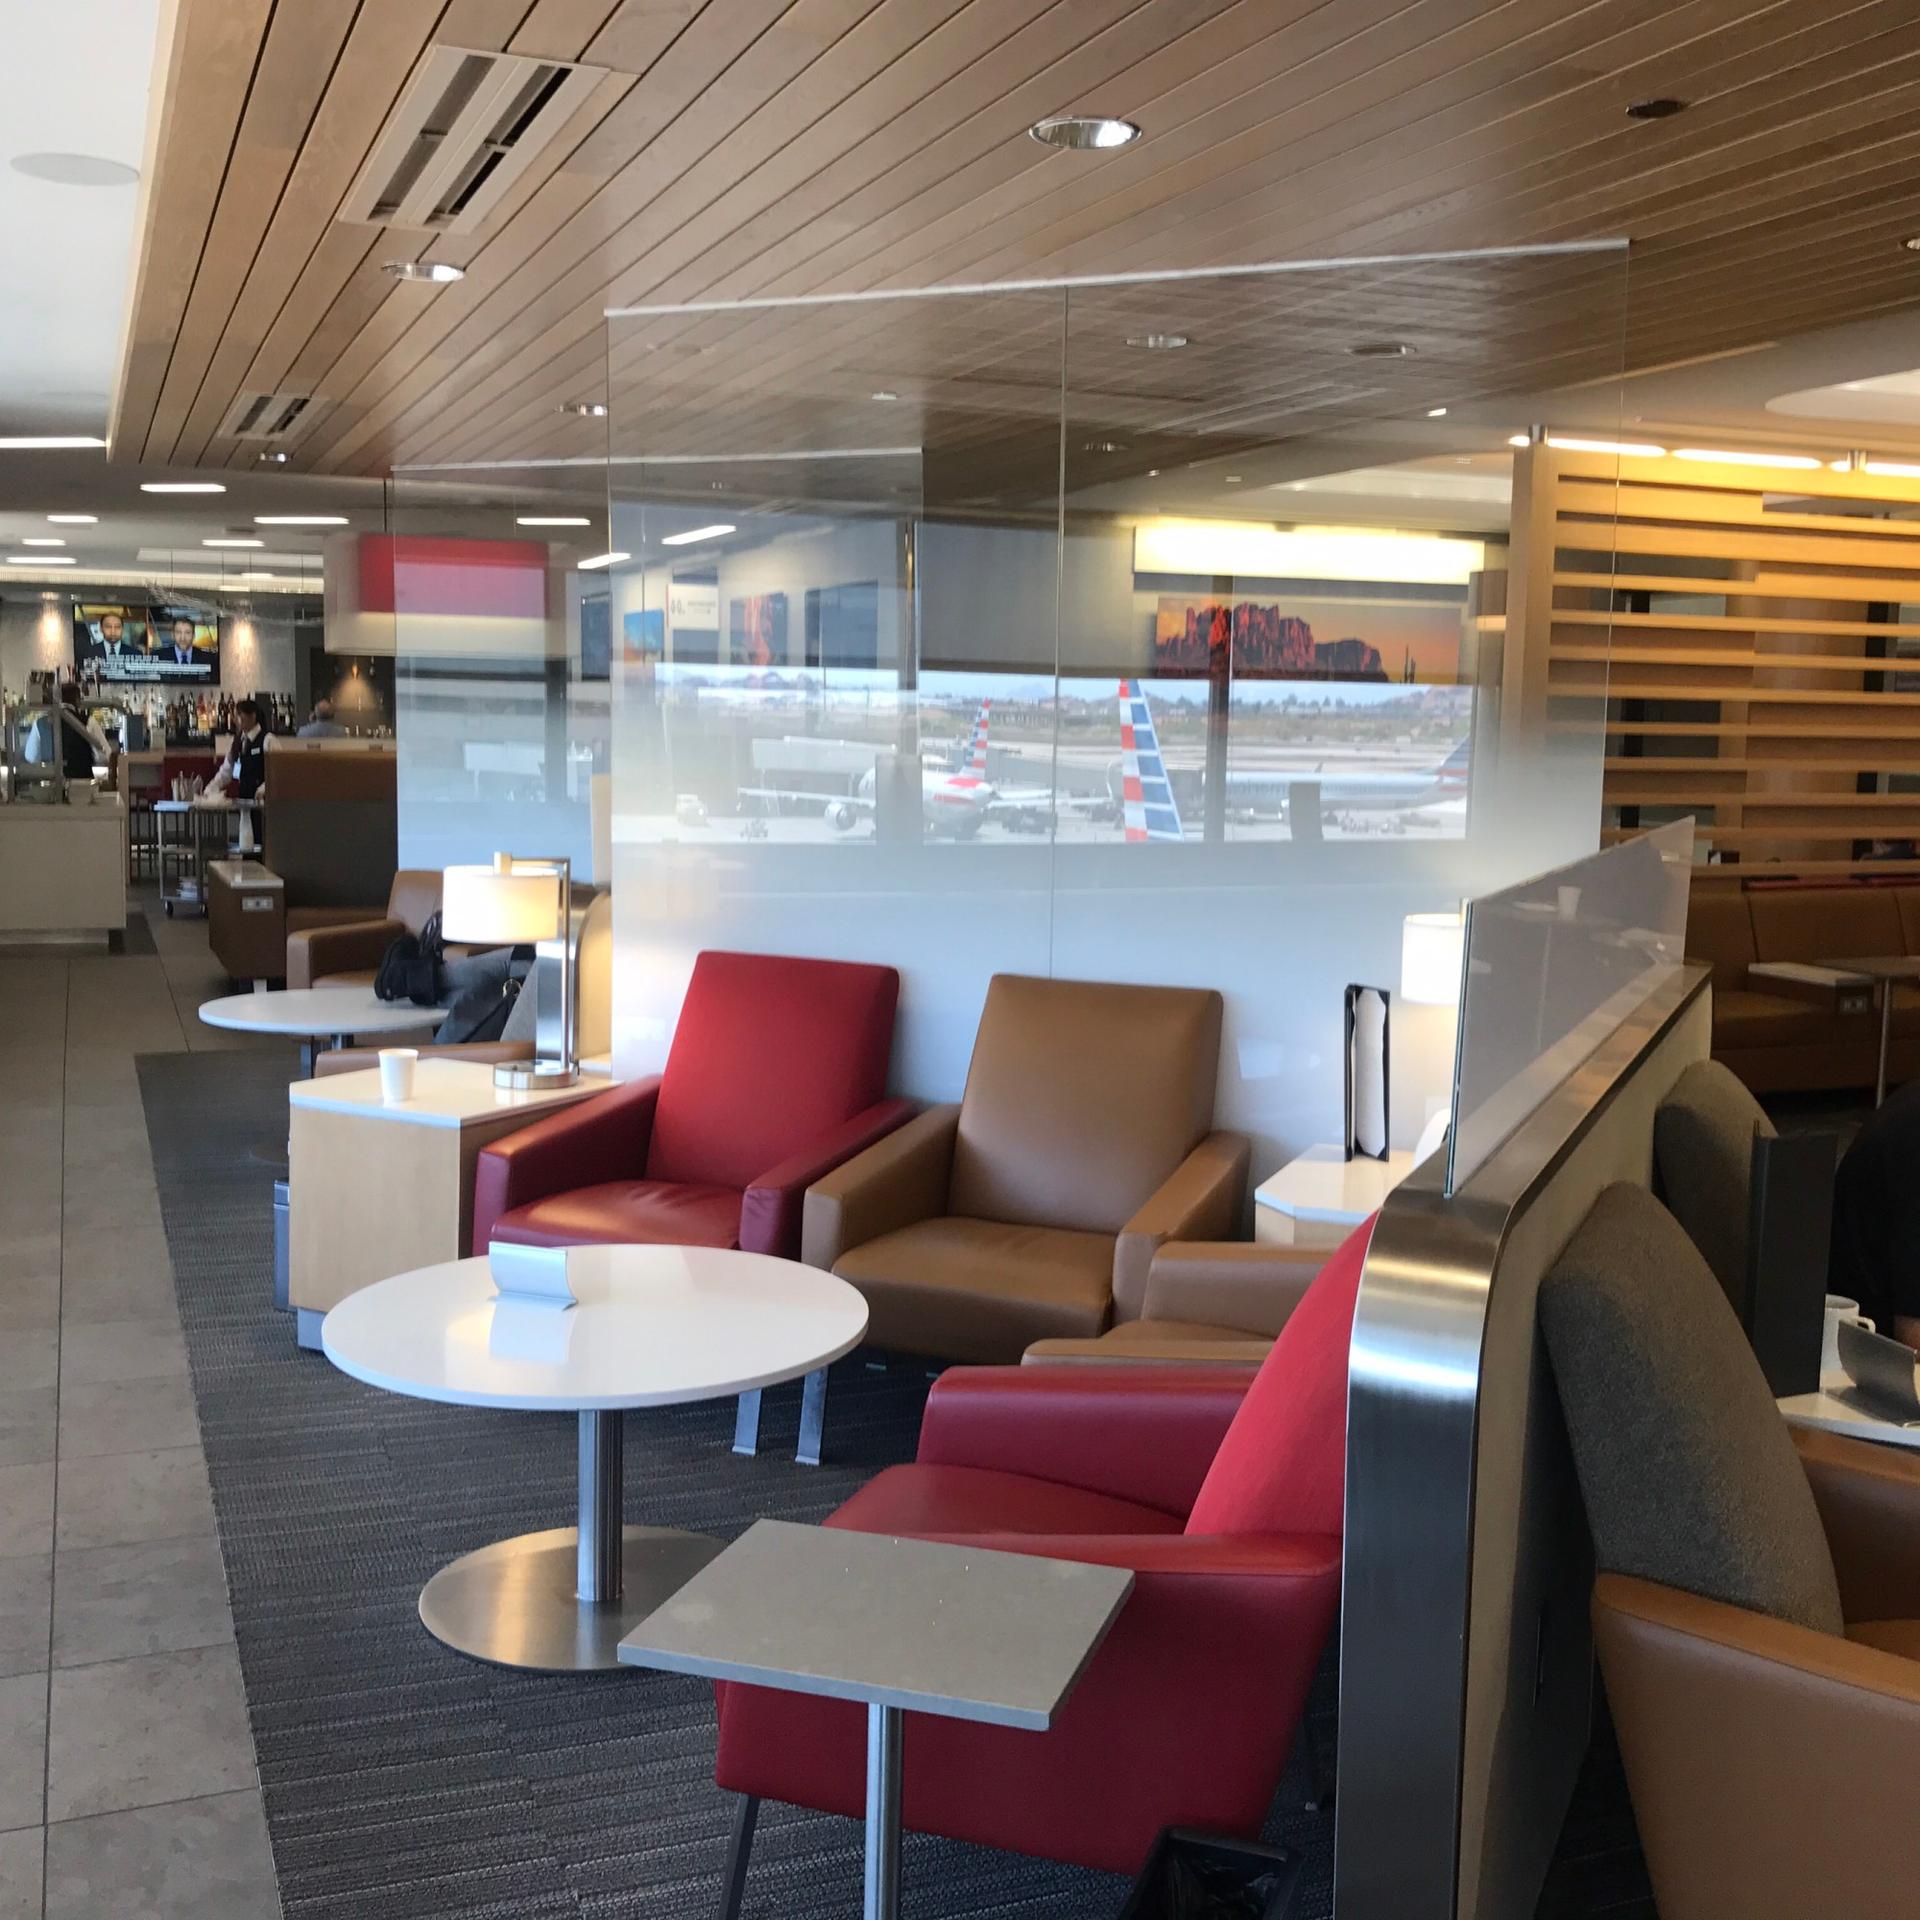 American Airlines Admirals Club (Gate A7) image 22 of 25